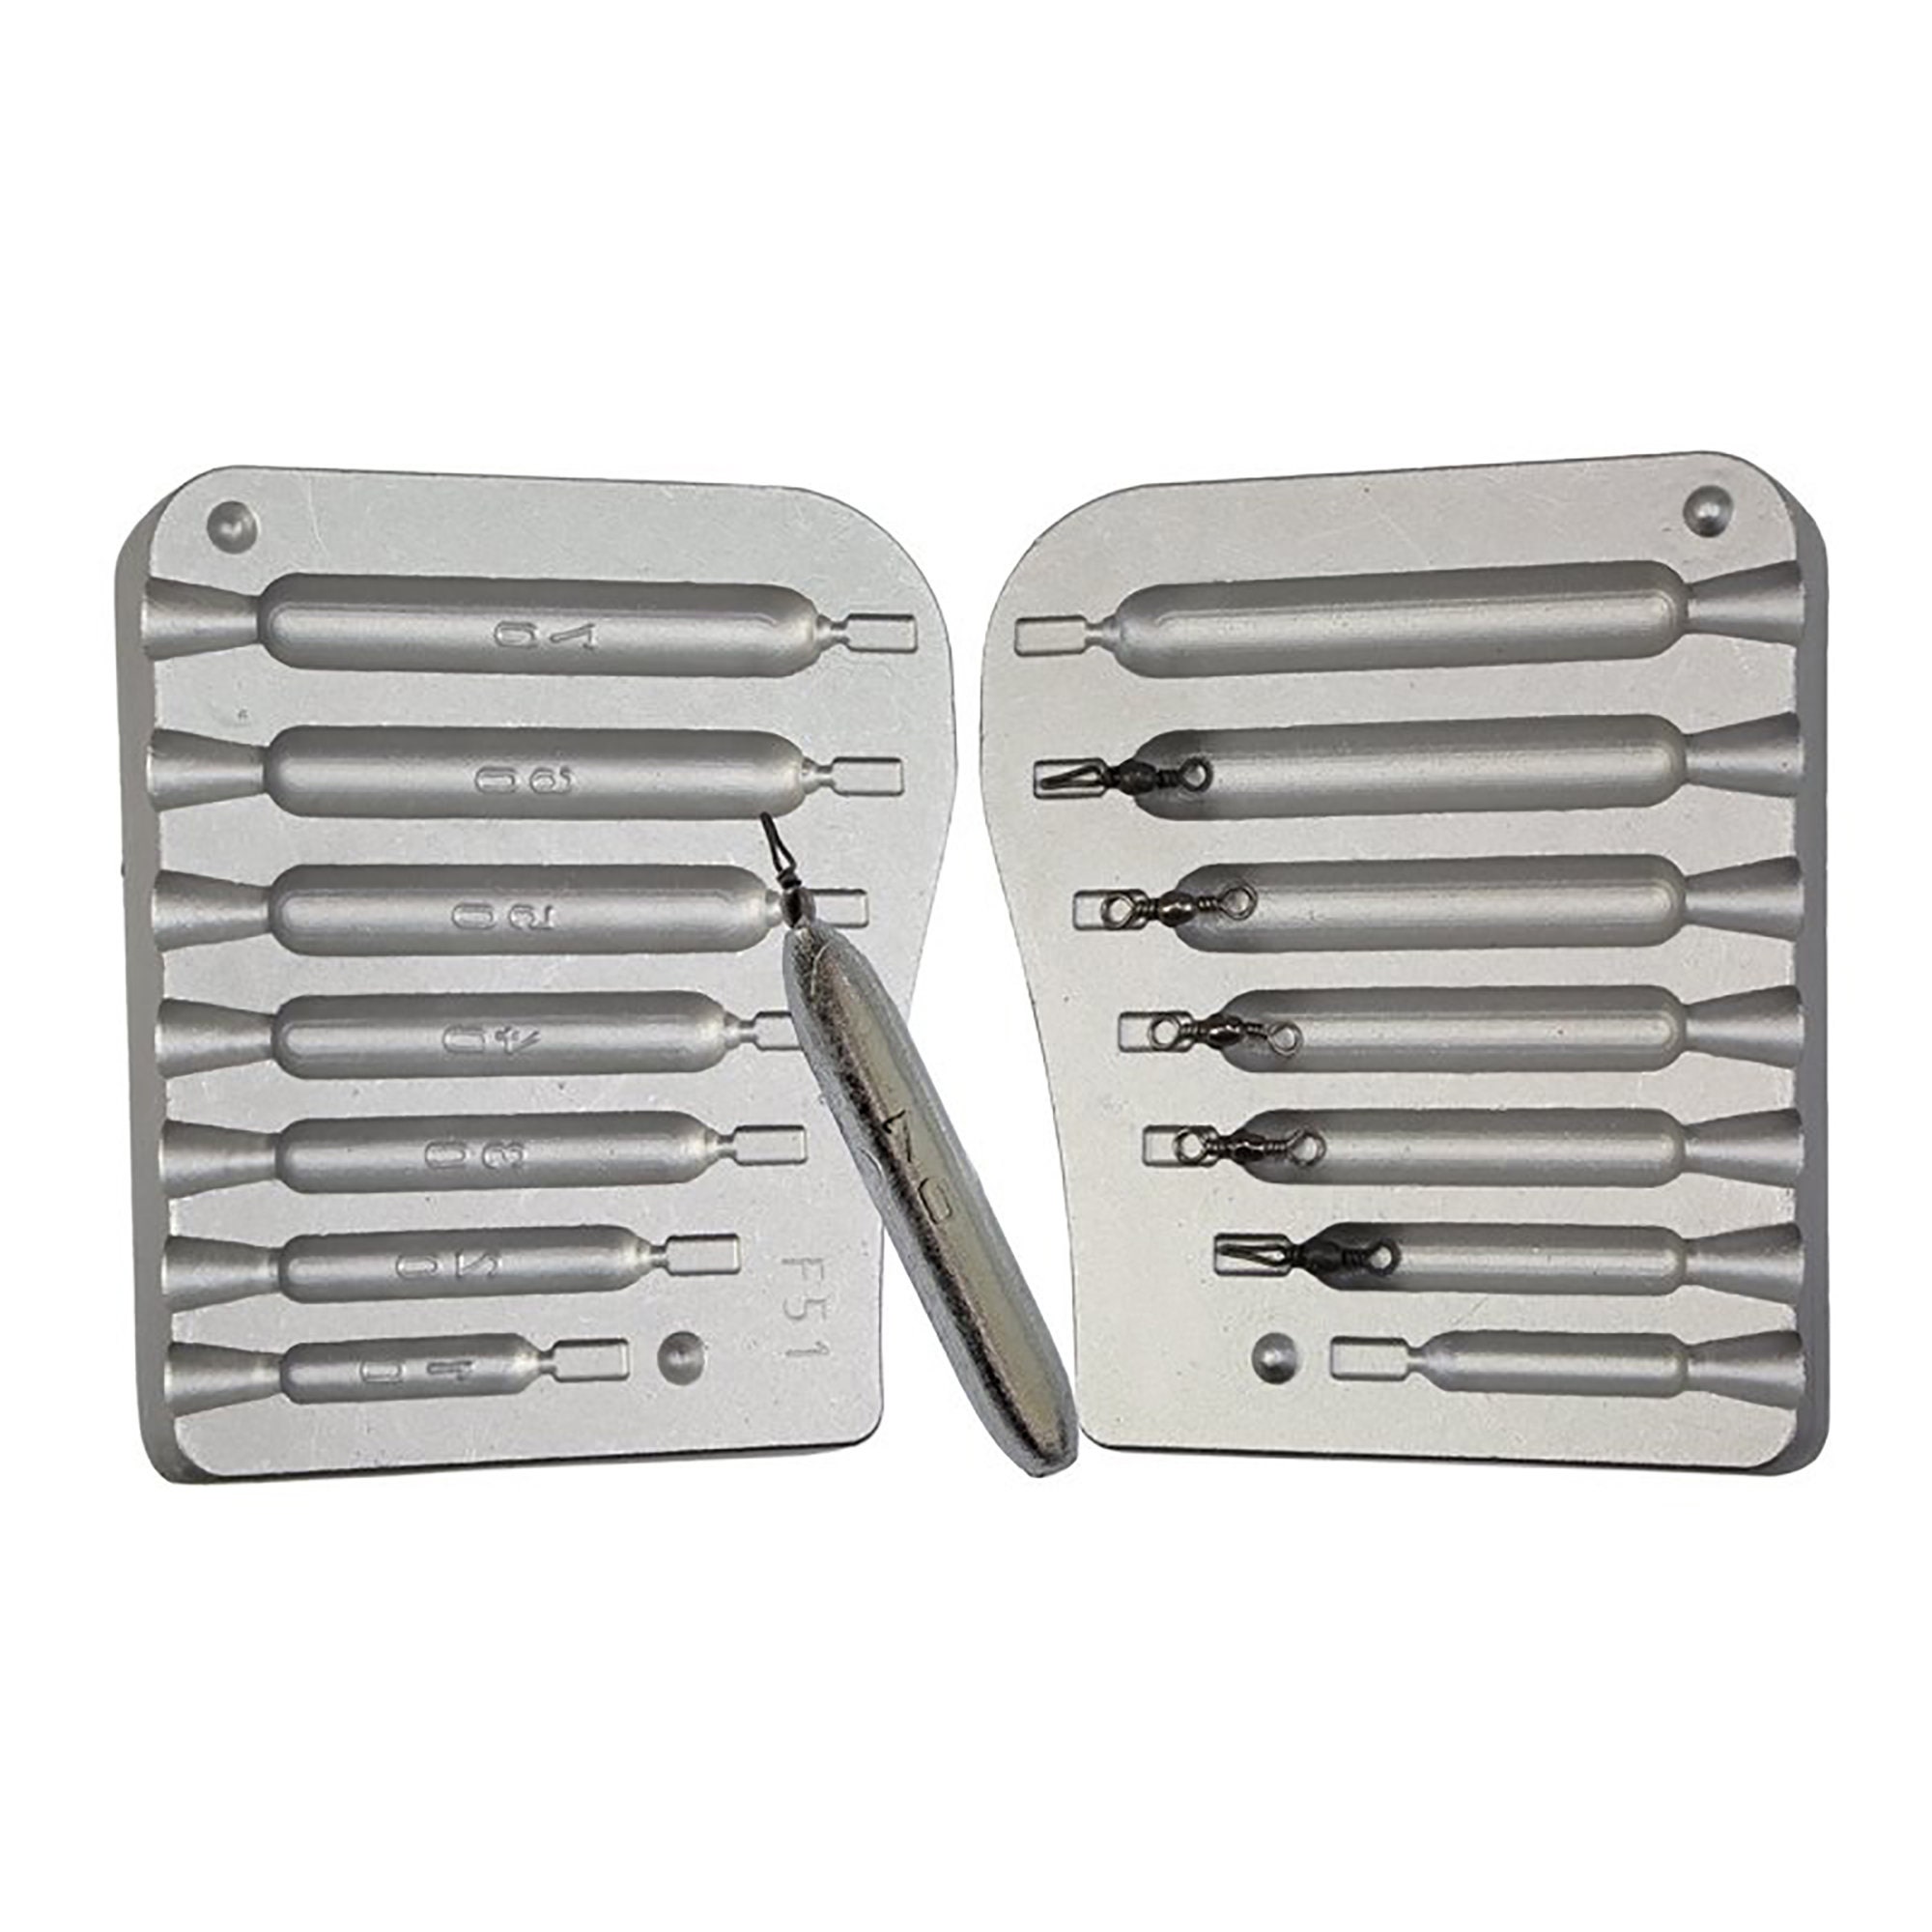 Cheap Fishing TIN/LEAD Molds ALUMINIUM MOULD Casting Moulds For TIN&LEAD